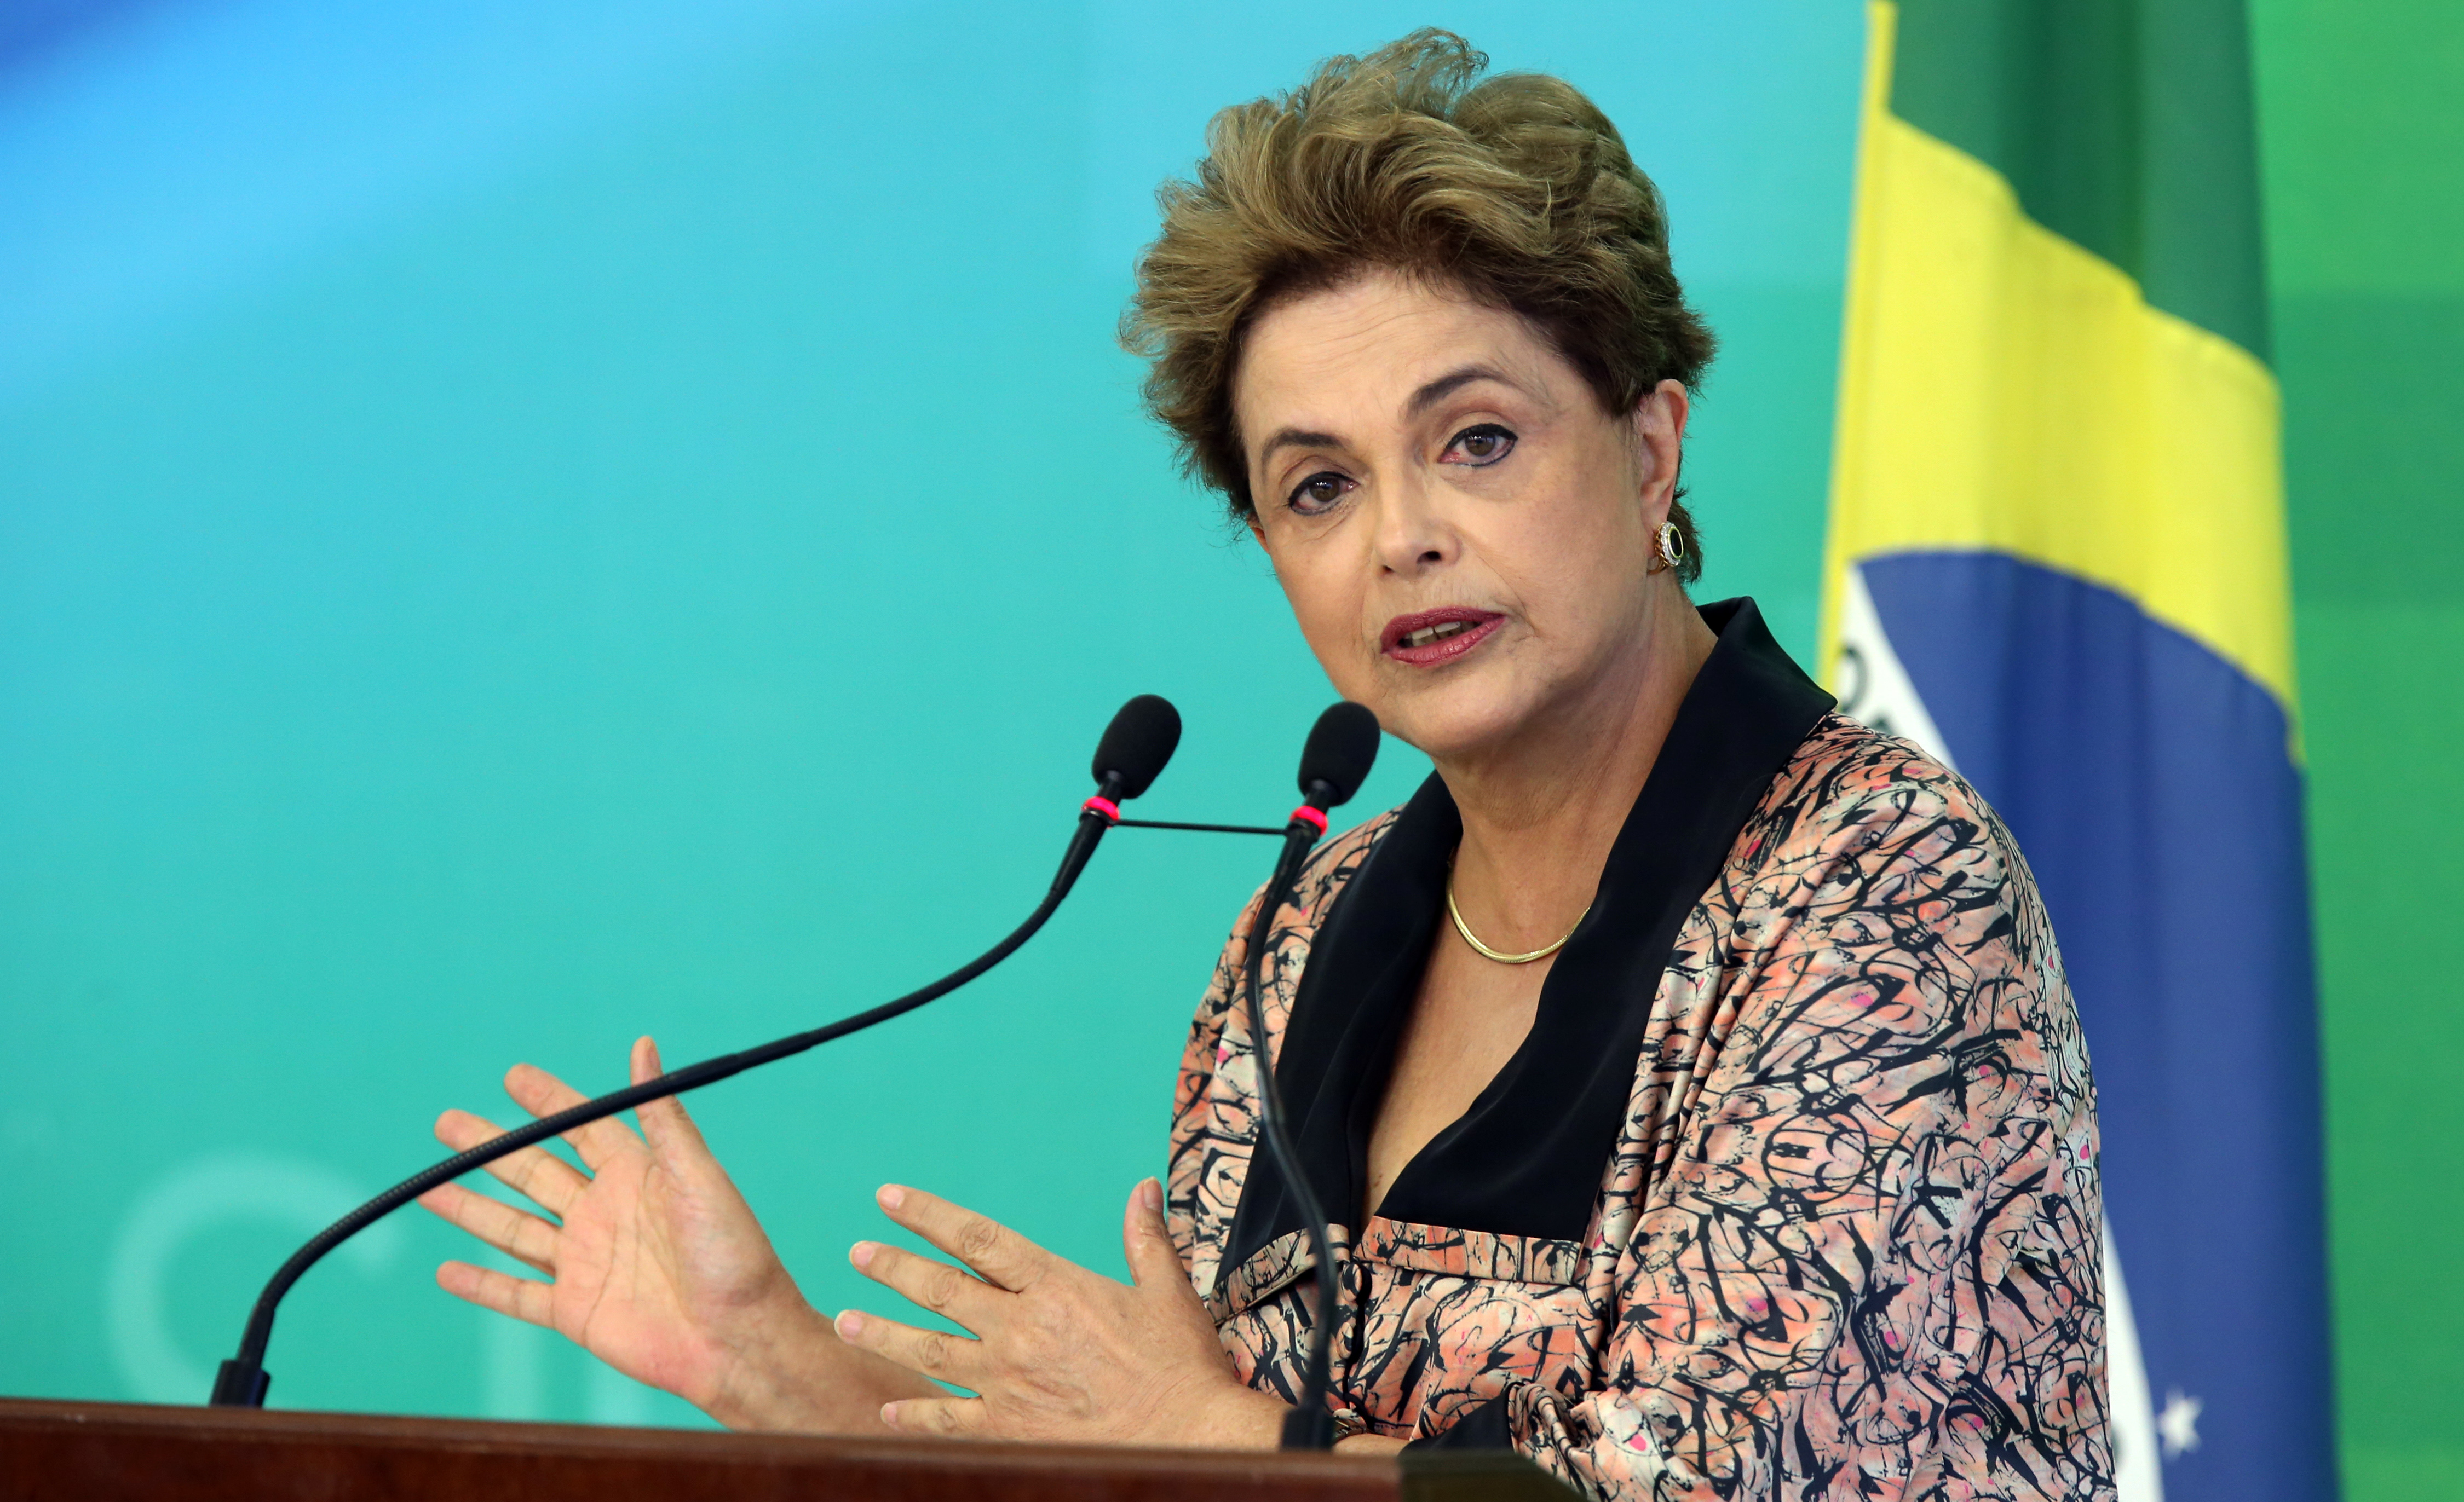 Brazil's President Dilma Rousseff speaks to members of the foreign press in Bras&iacute;lia, on April 19, 2016 (Bloomberg/Getty Images)